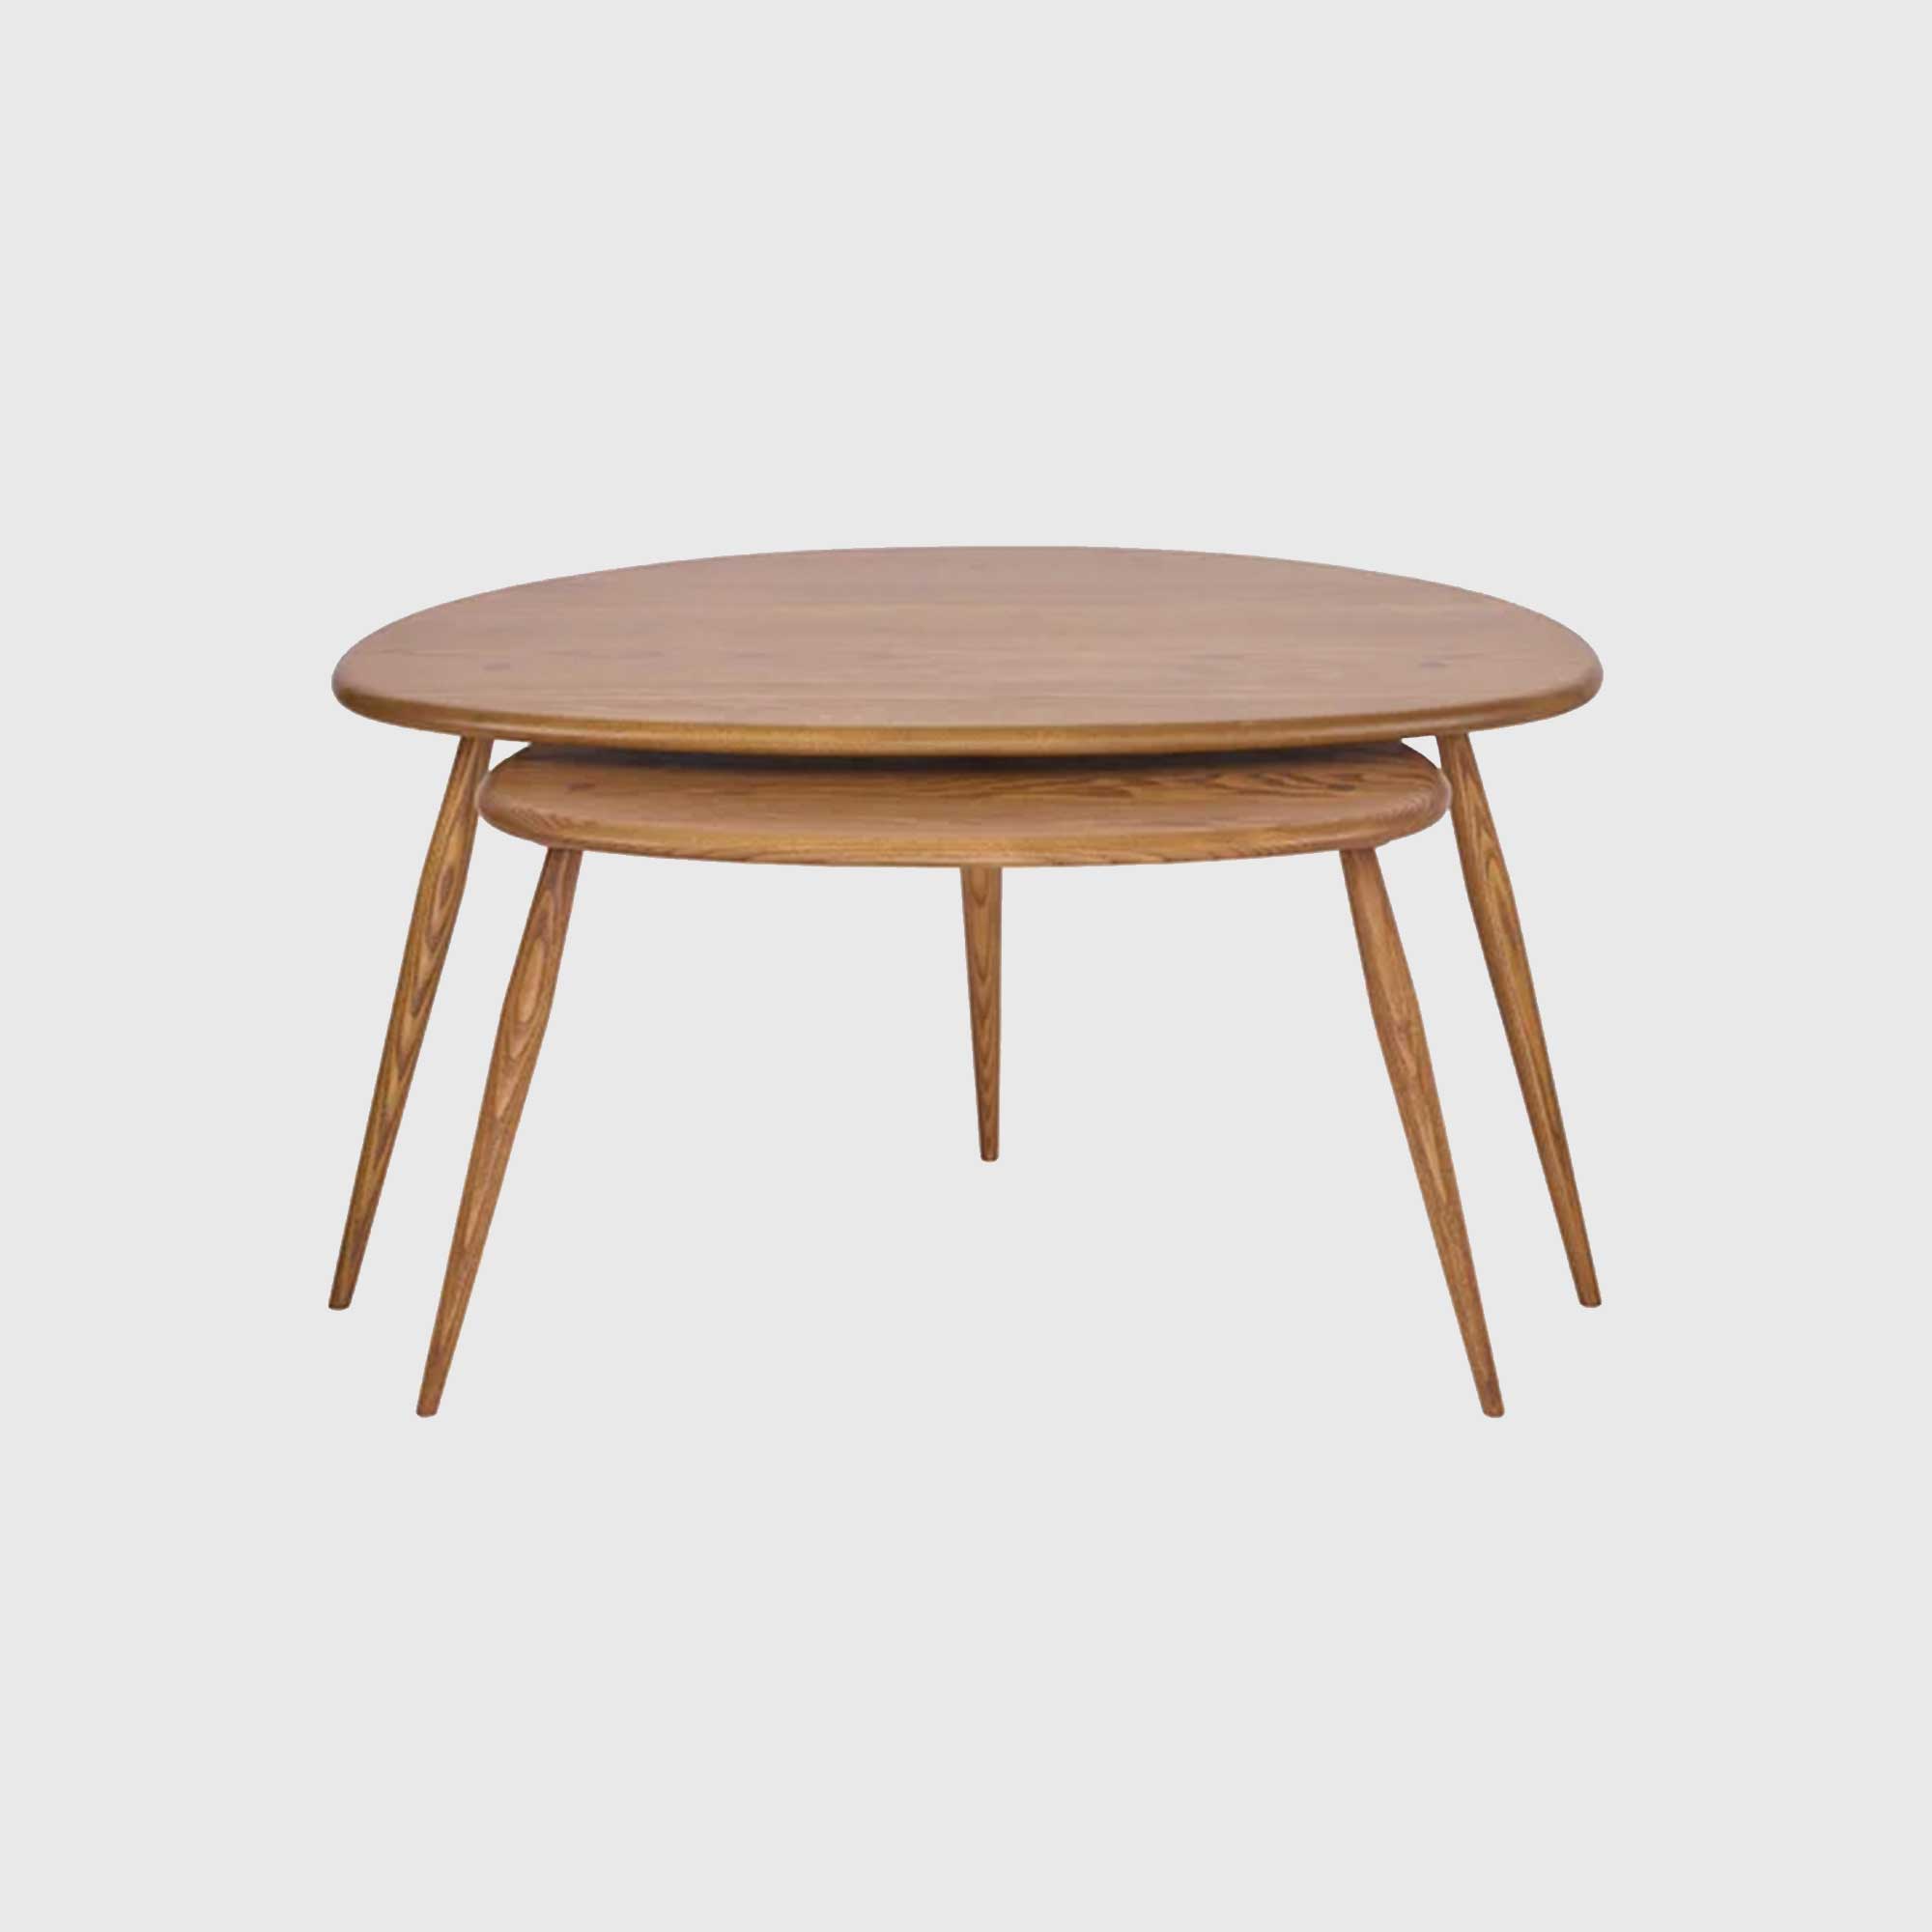 Ercol Pebble Coffee Table Nest, Round, Brown | Barker & Stonehouse